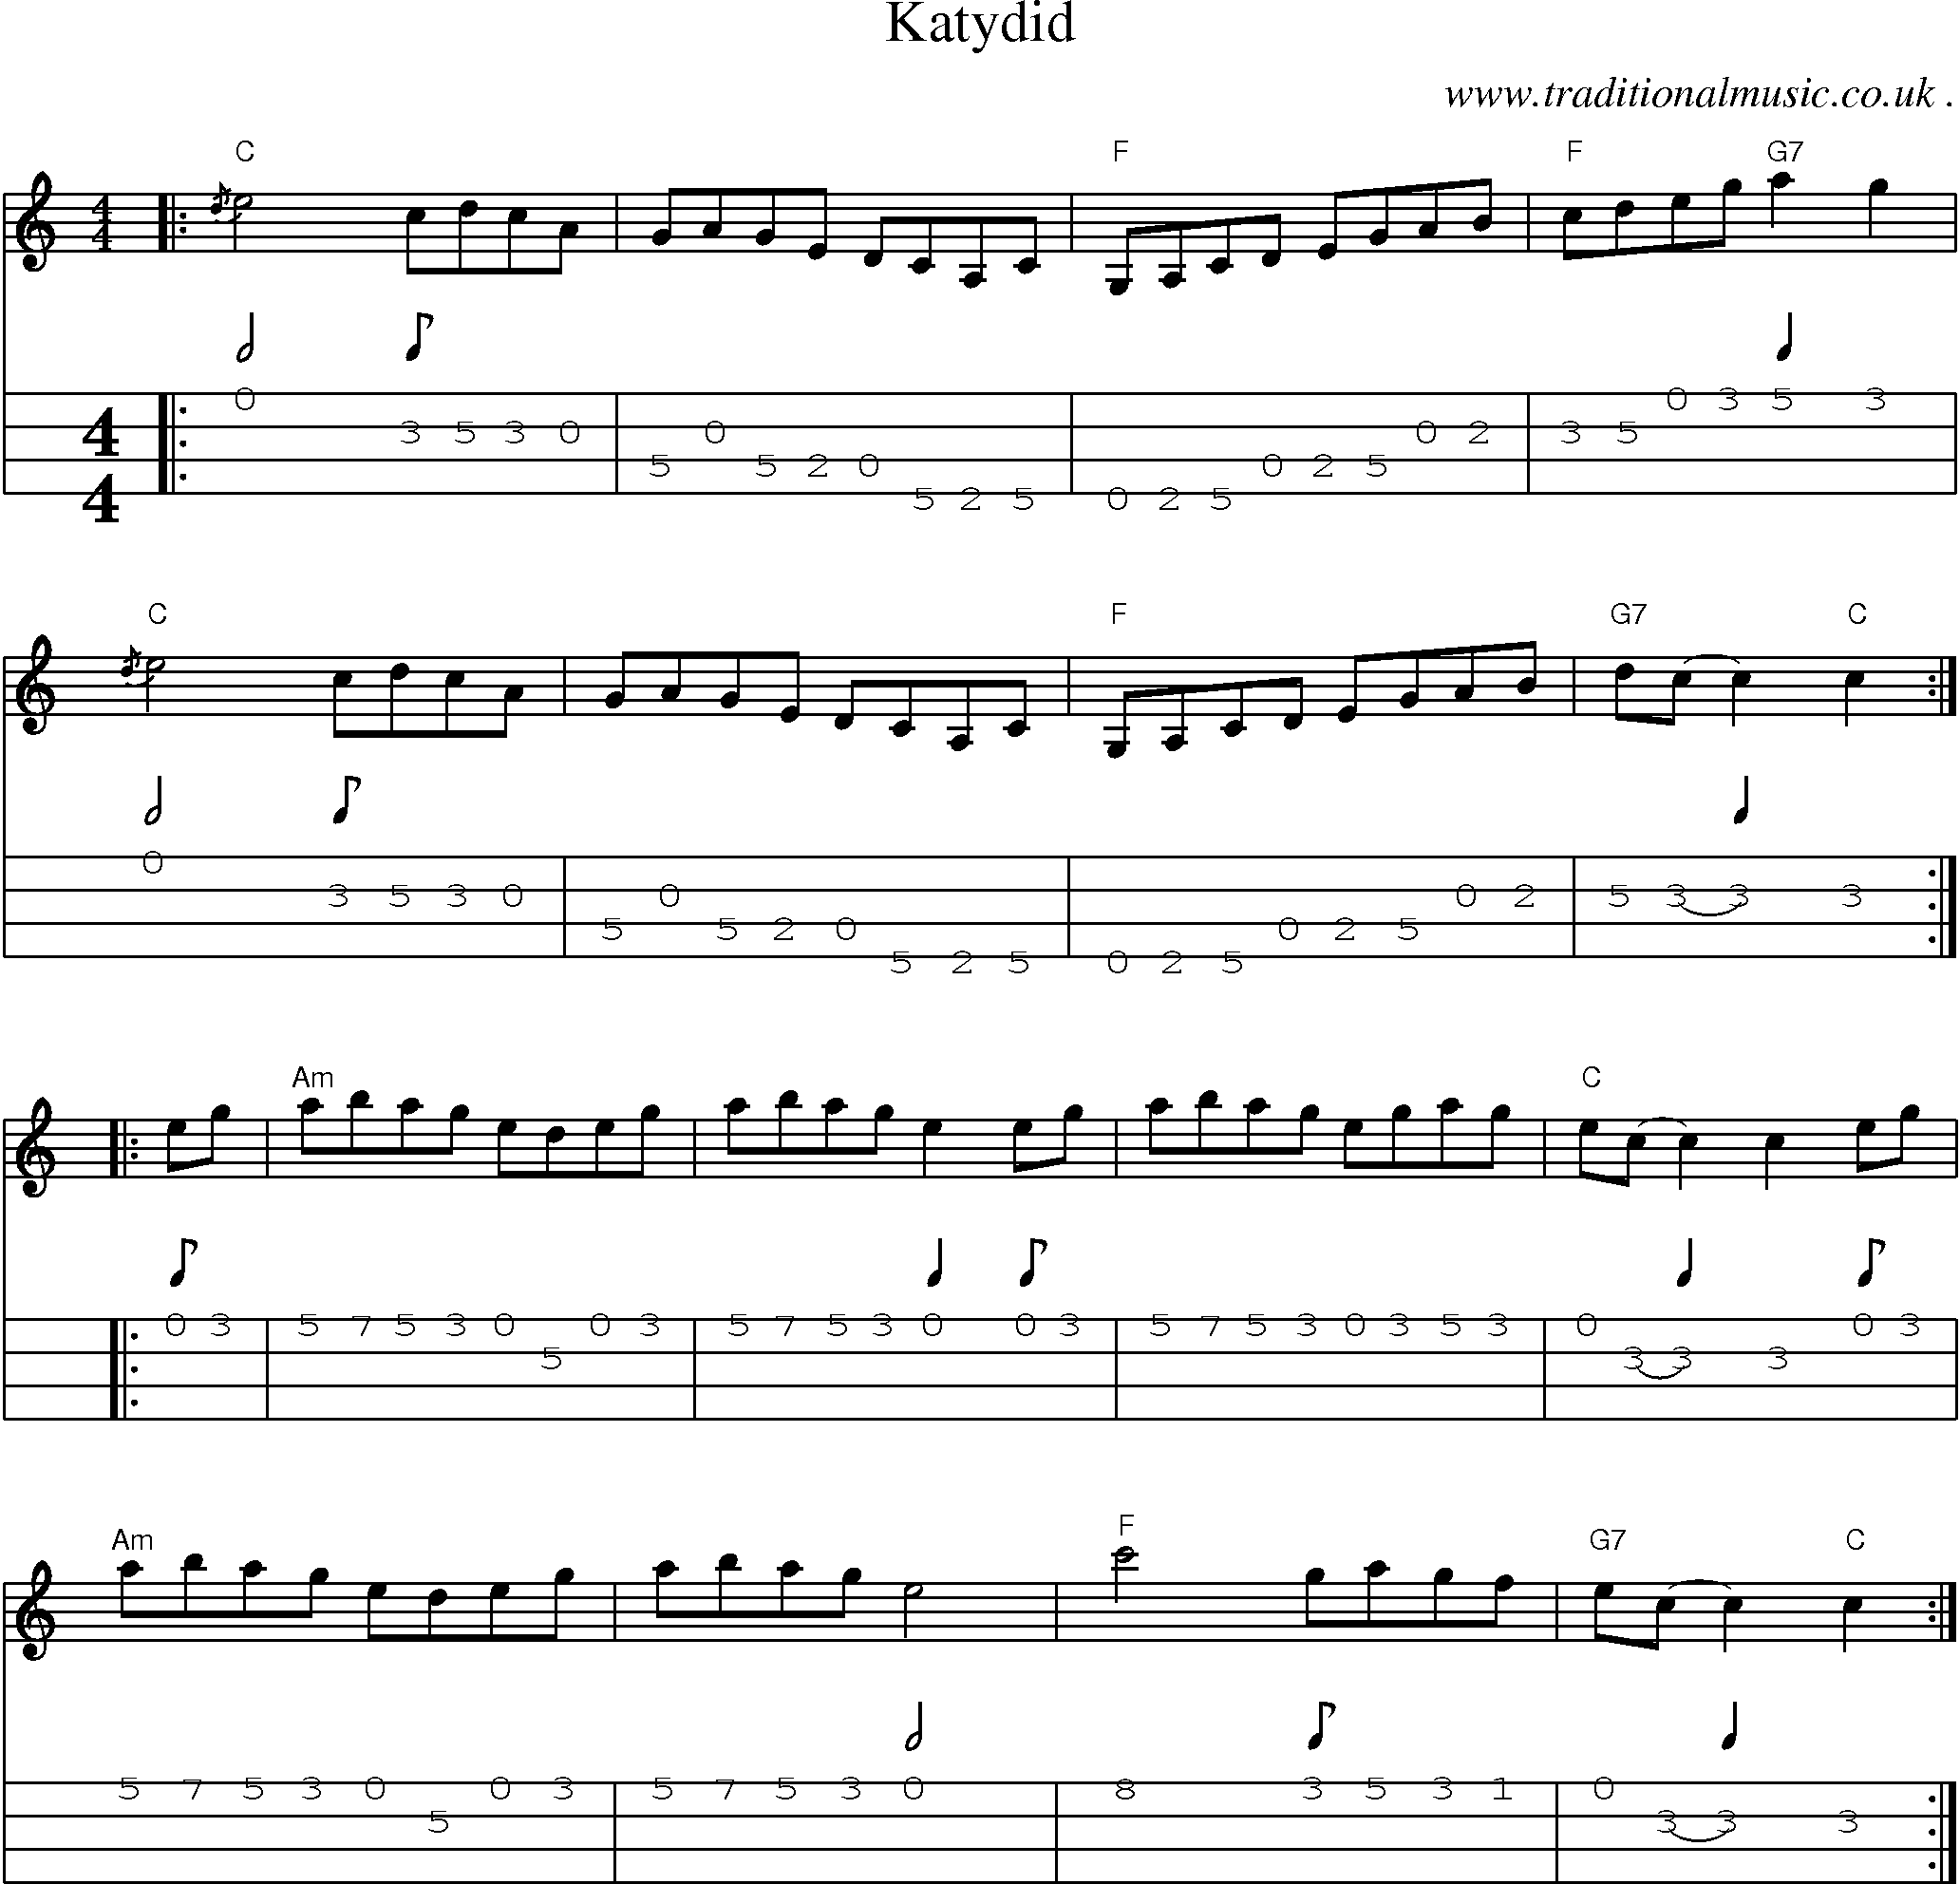 Music Score and Guitar Tabs for Katydid